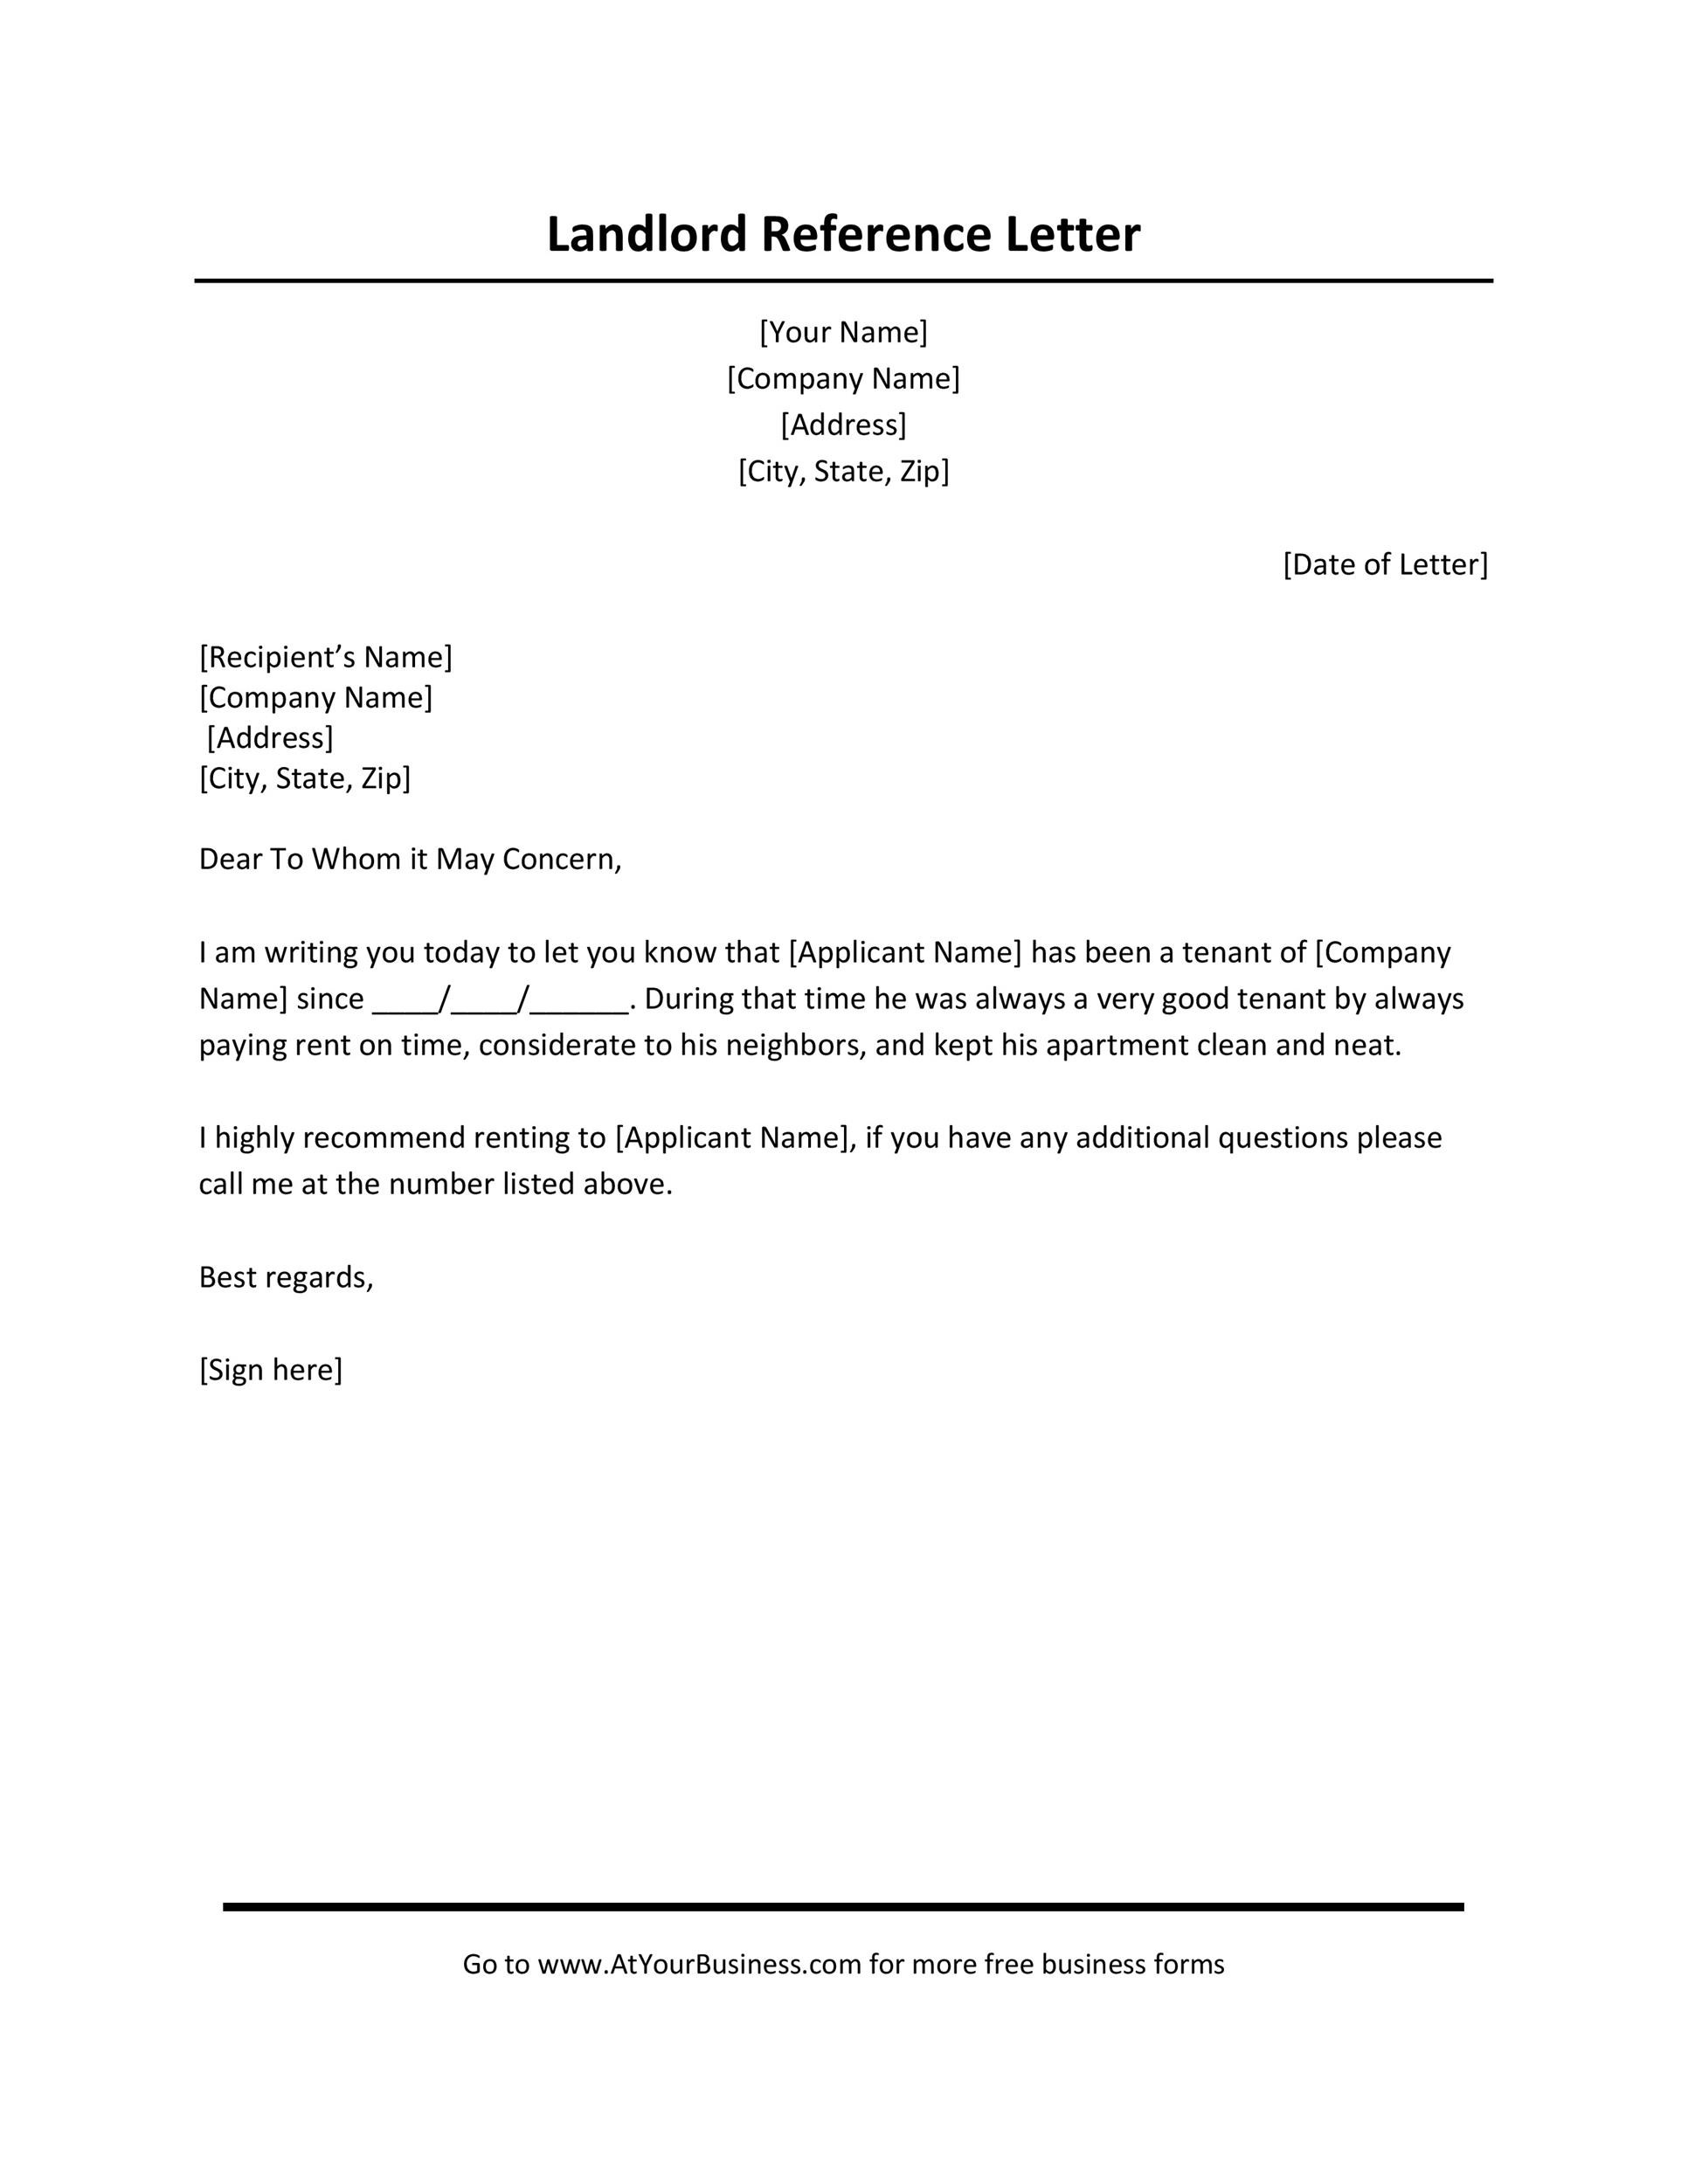 Free landlord reference letter 26